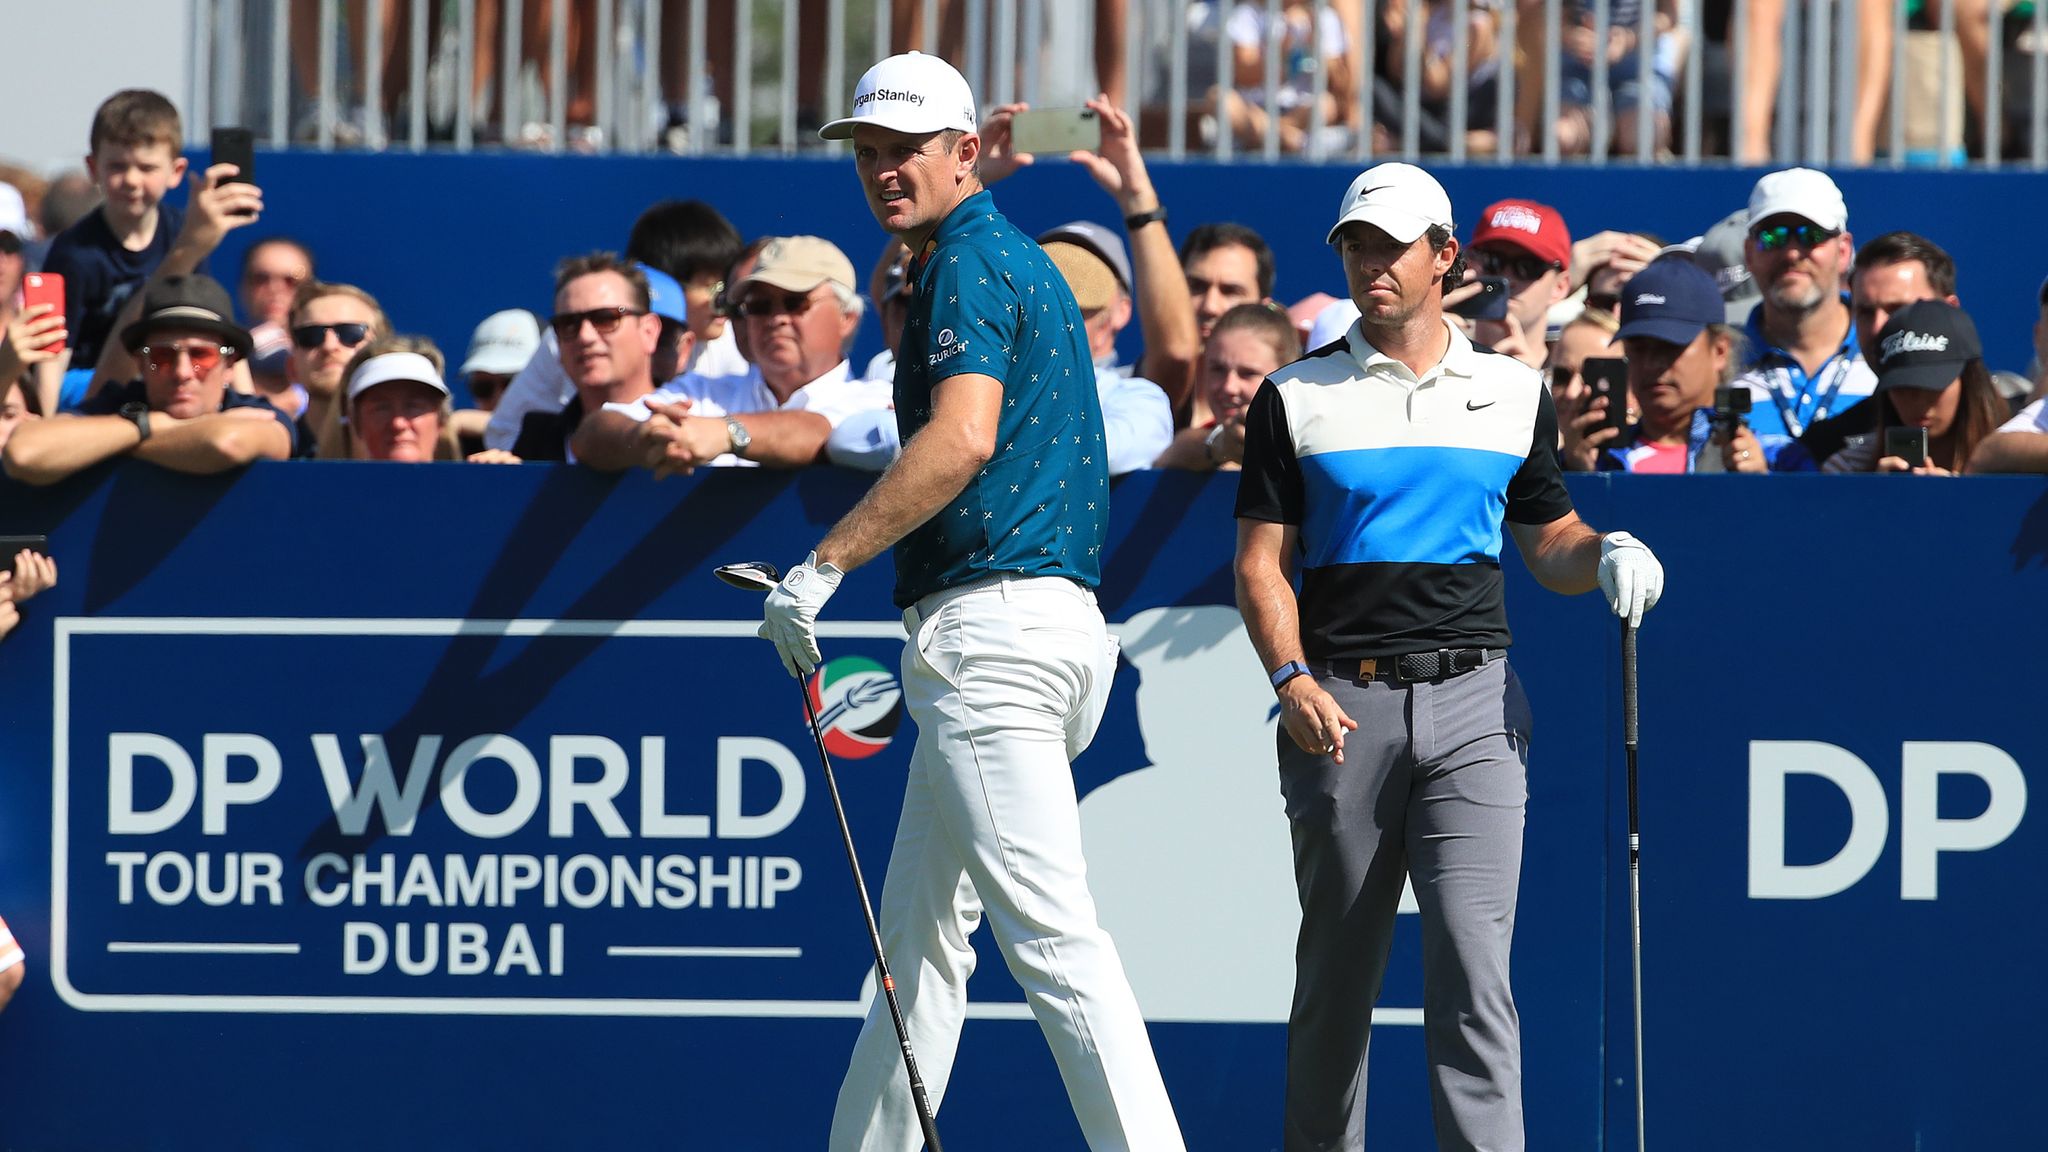 Jon Rahm moves into share of lead at DP World Tour Championship Golf News Sky Sports